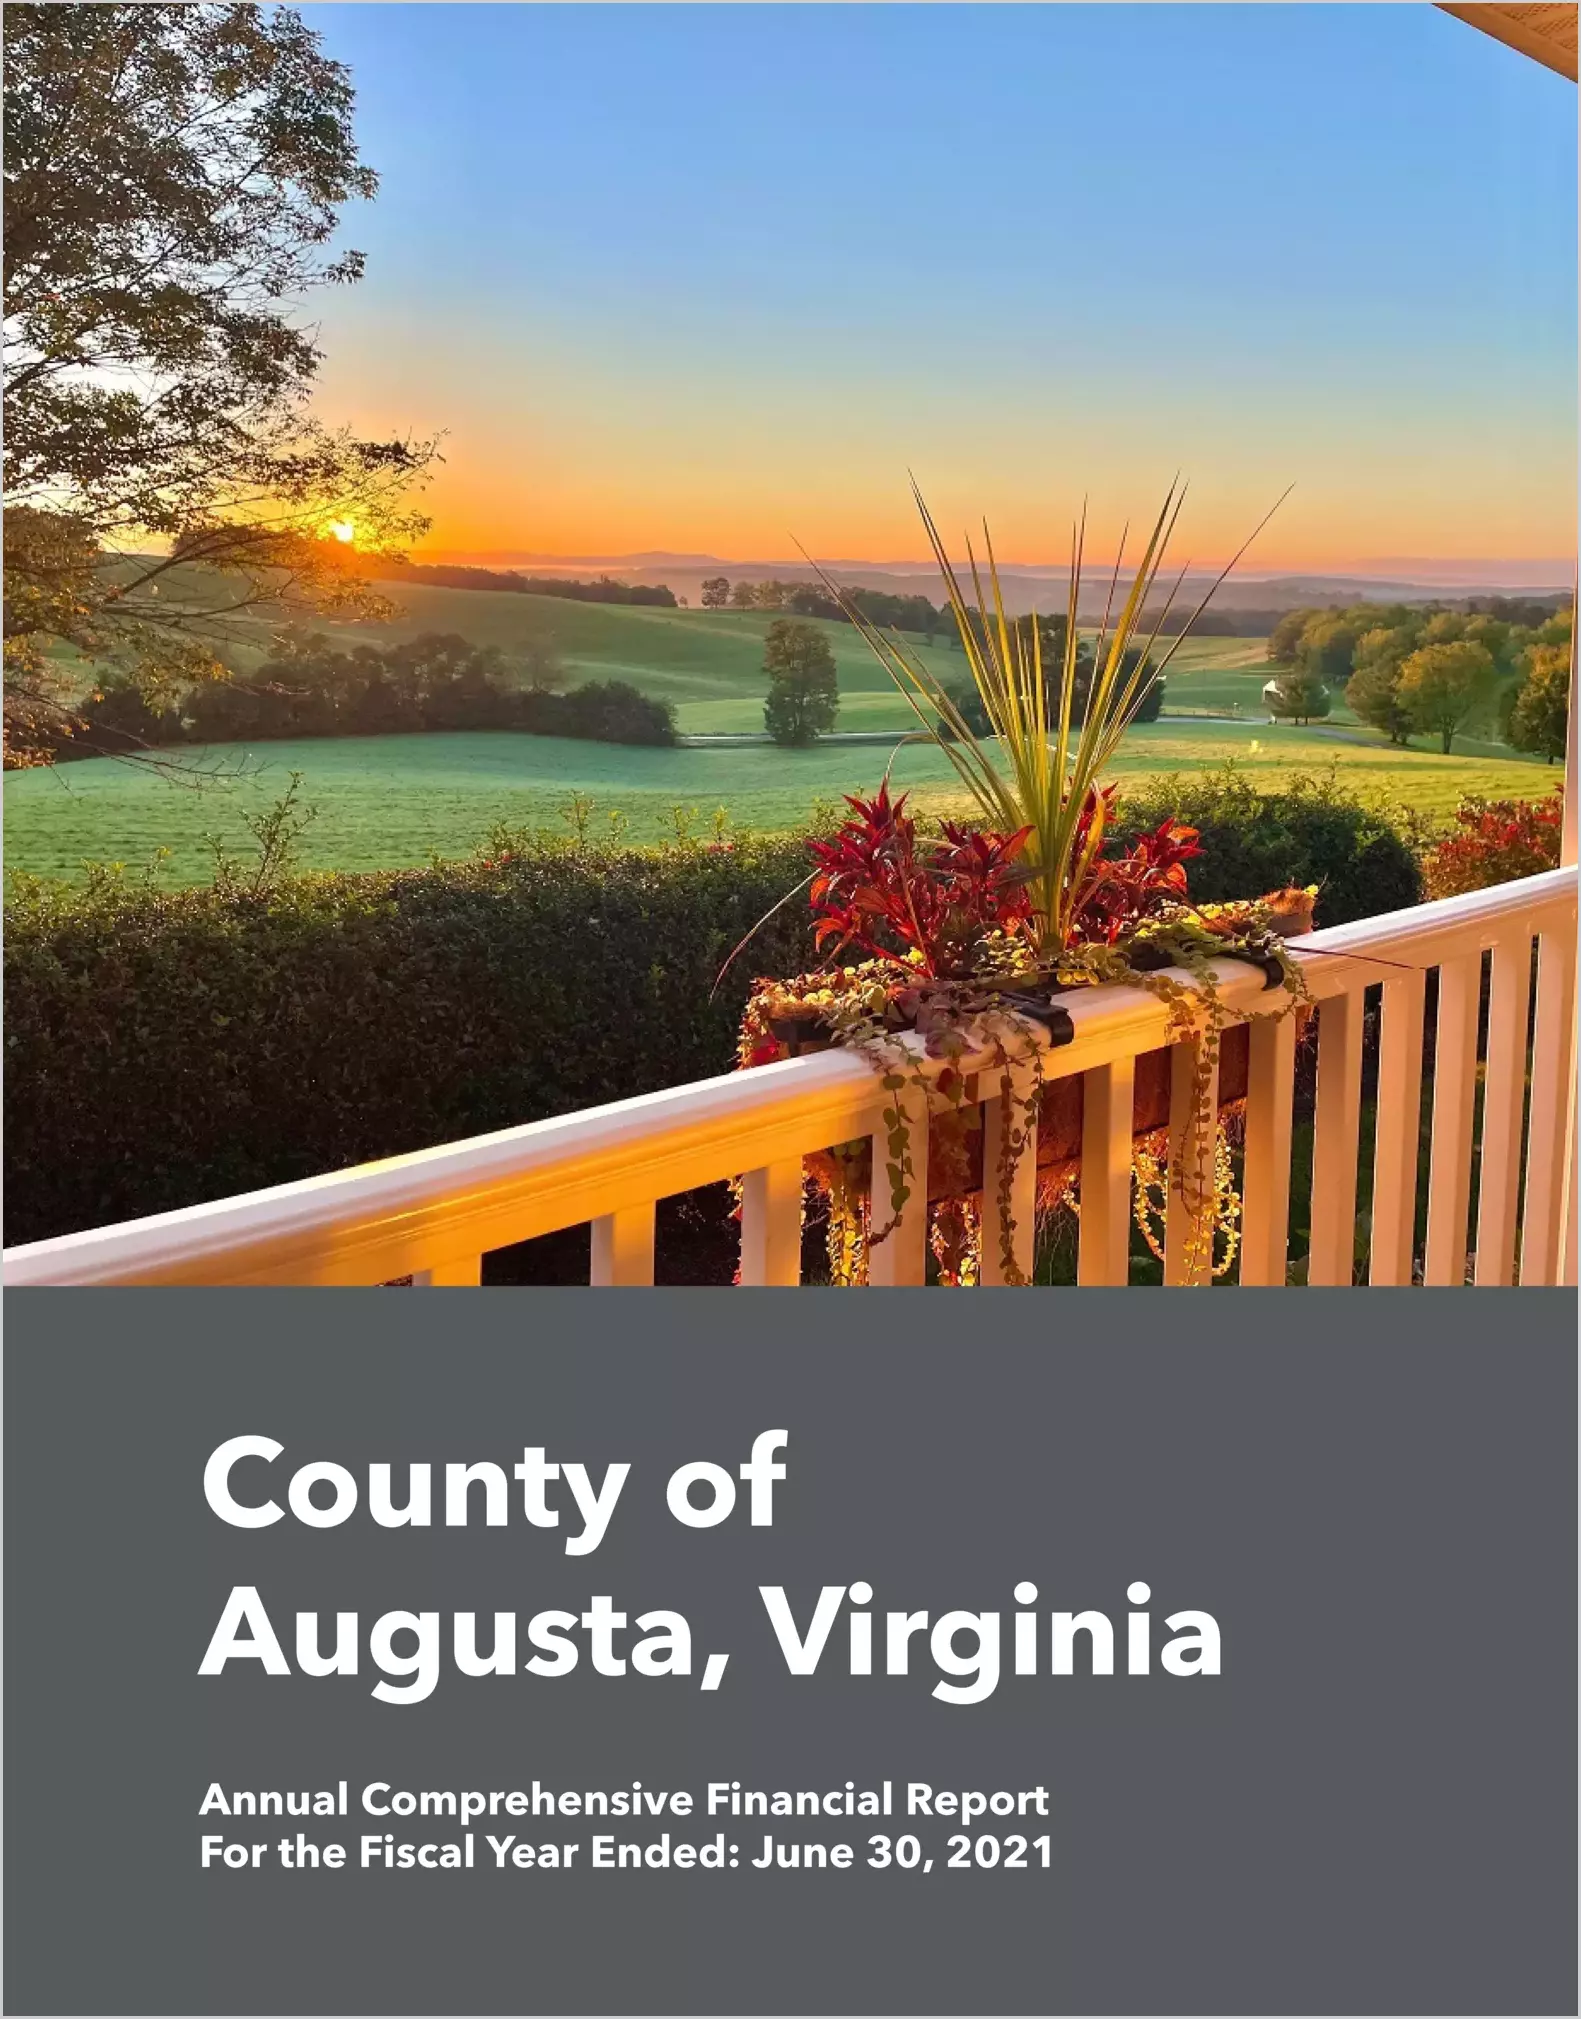 2021 Annual Financial Report for County of Augusta